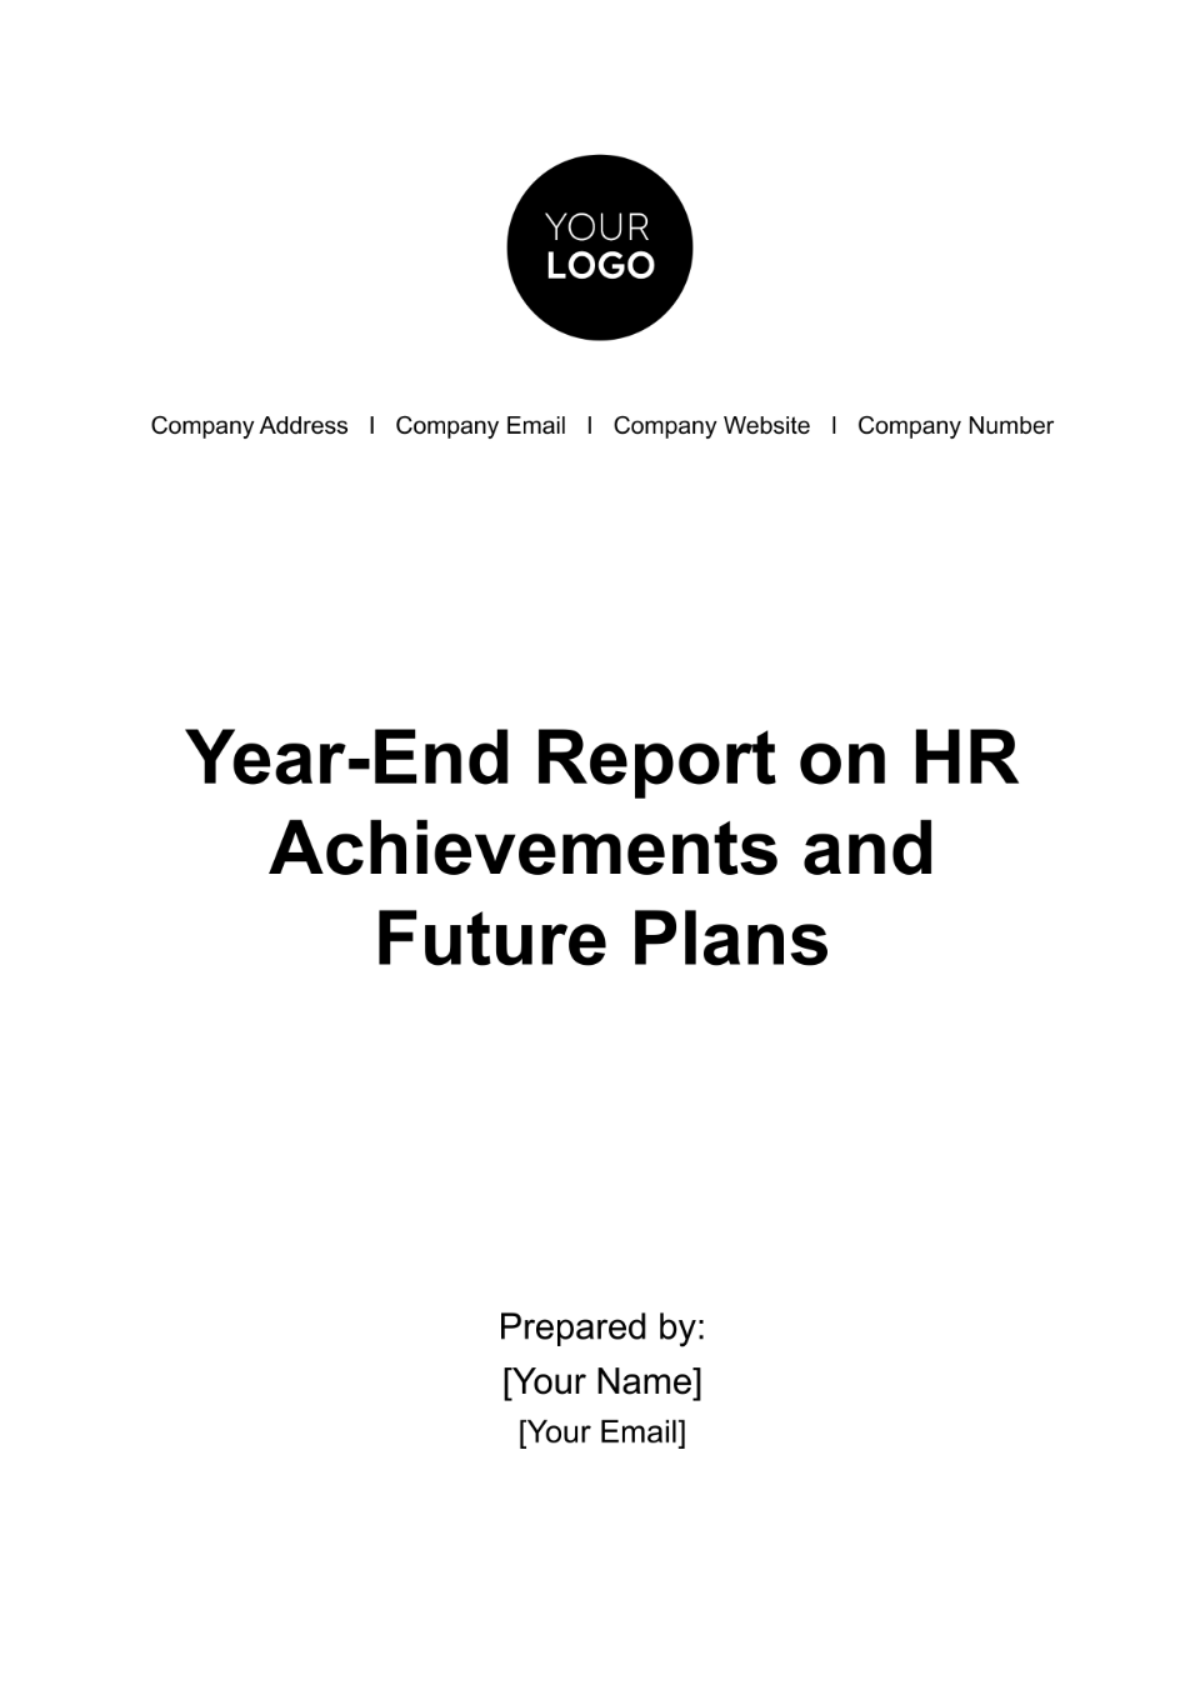 Free Year-End Report on HR Achievements and Future Plans Template